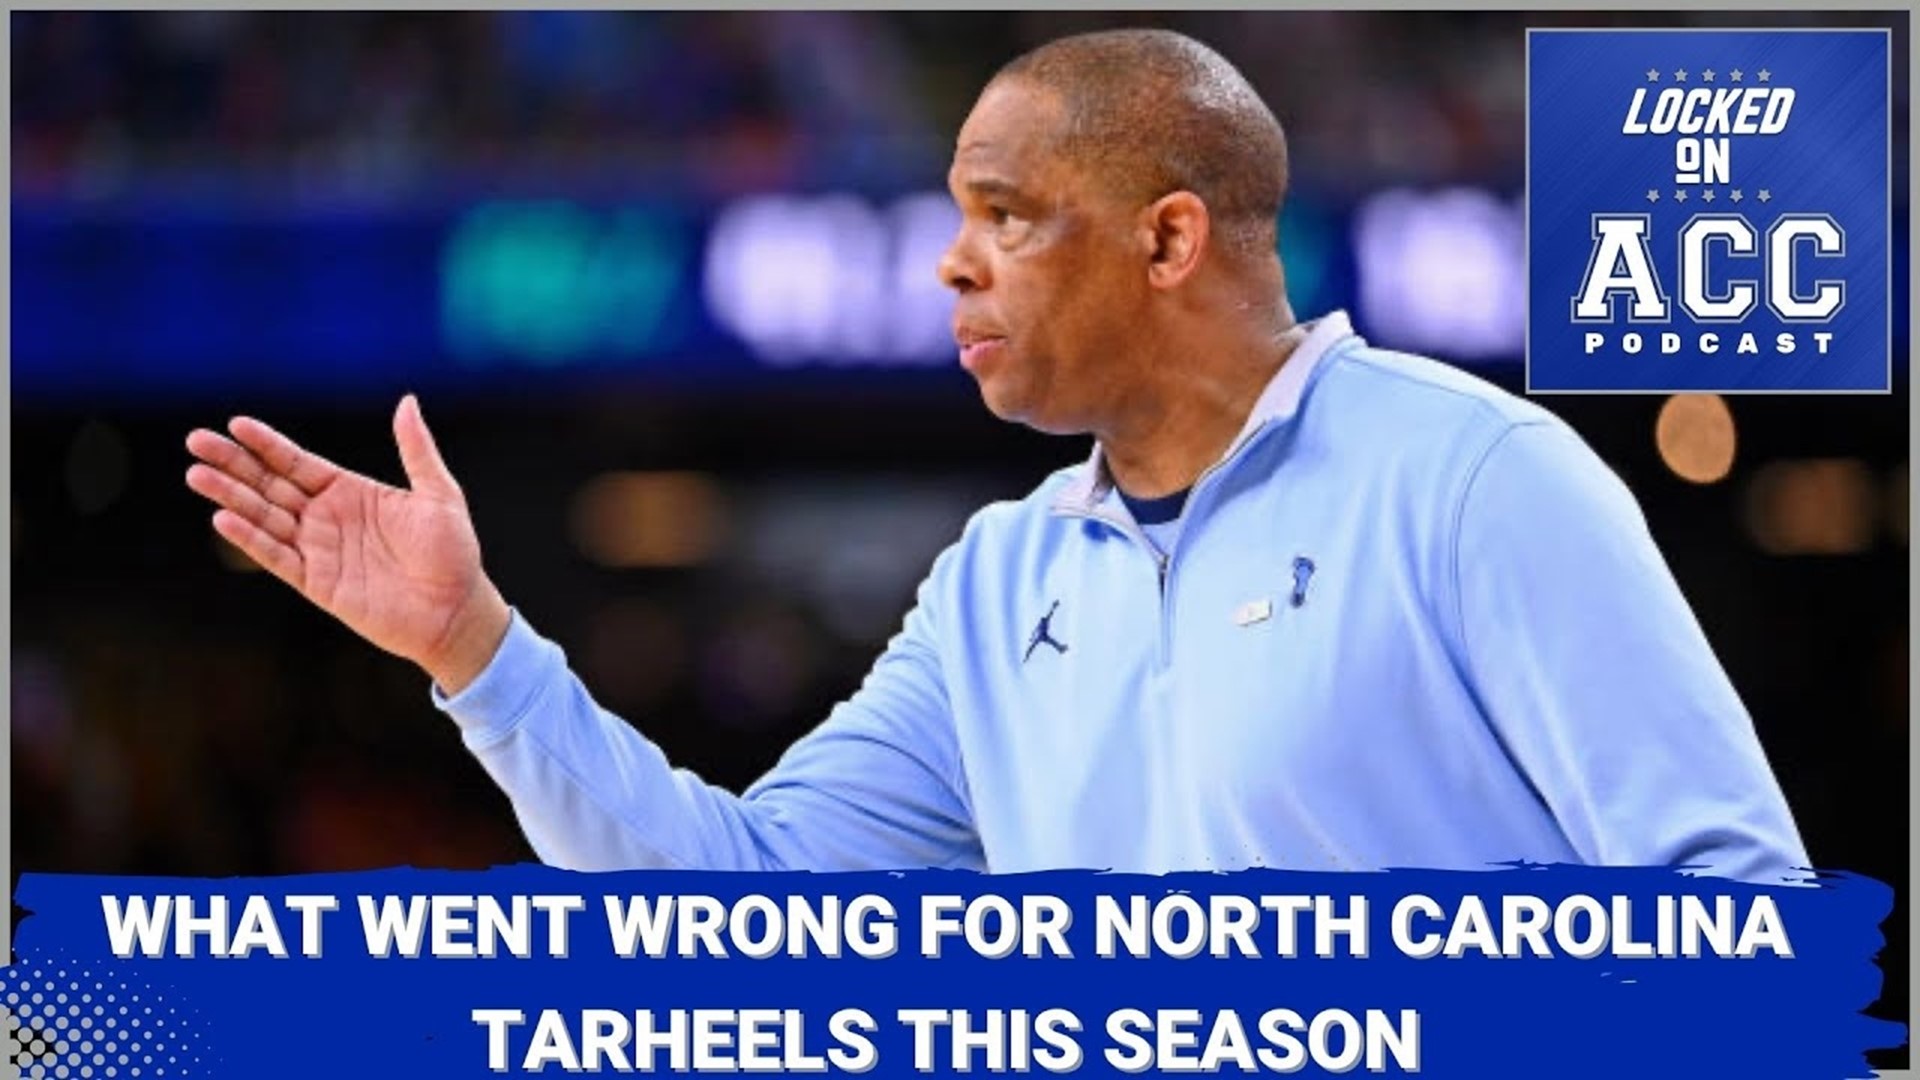 The Tar Heels were supposed to use this season for redemption, but instead find themselves potentially OUT of the NCAA Tournament.